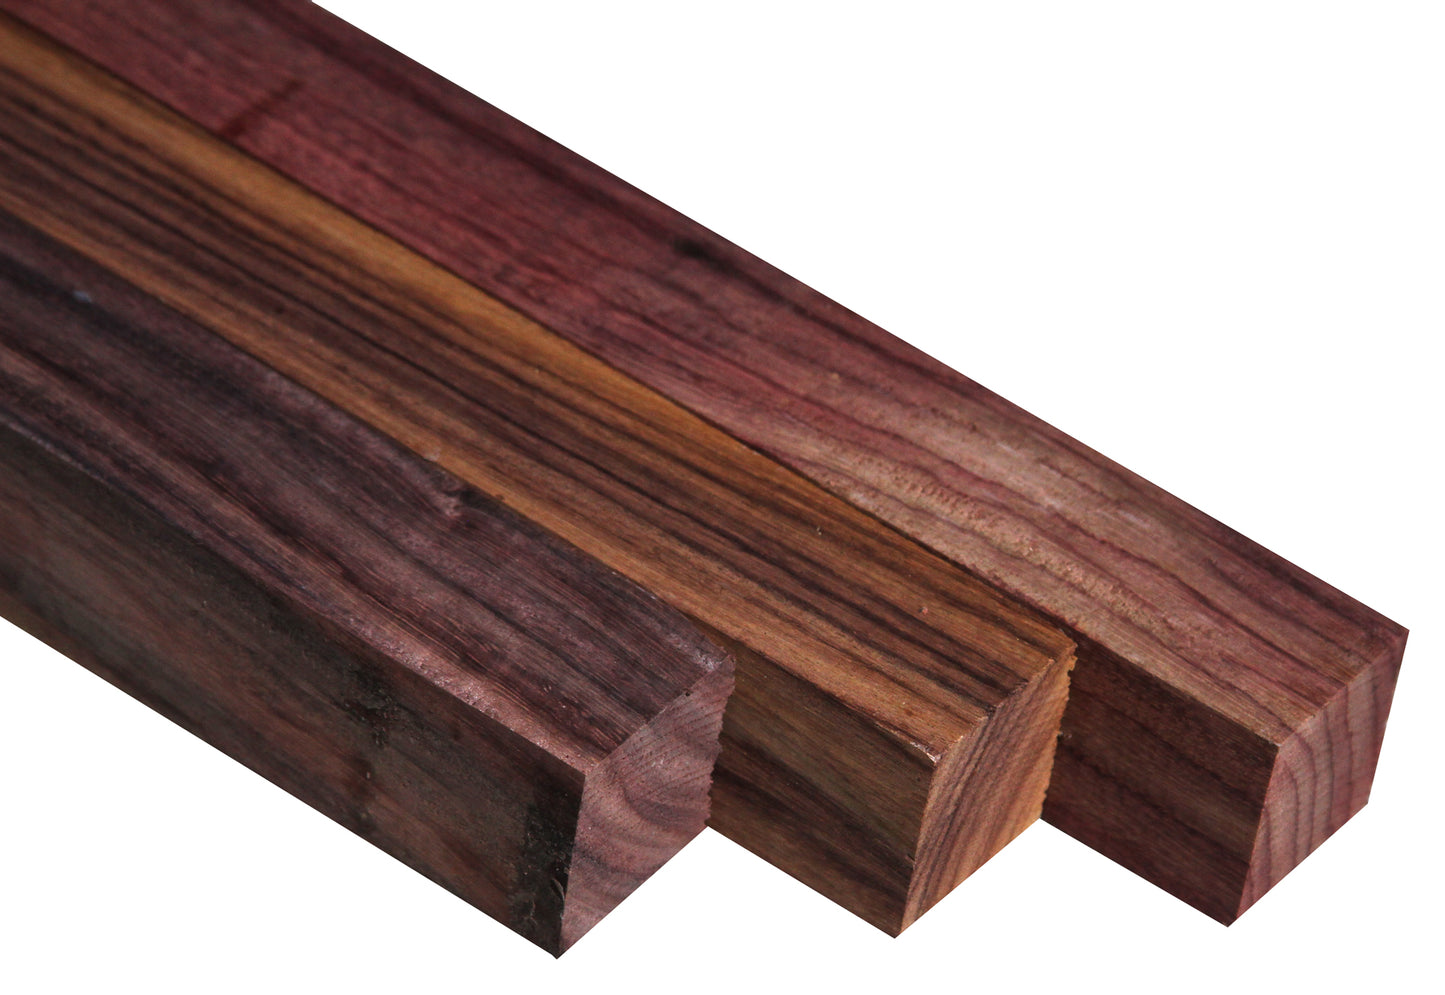 East Indian Rosewood Turning Square (24" x 2" x 2")